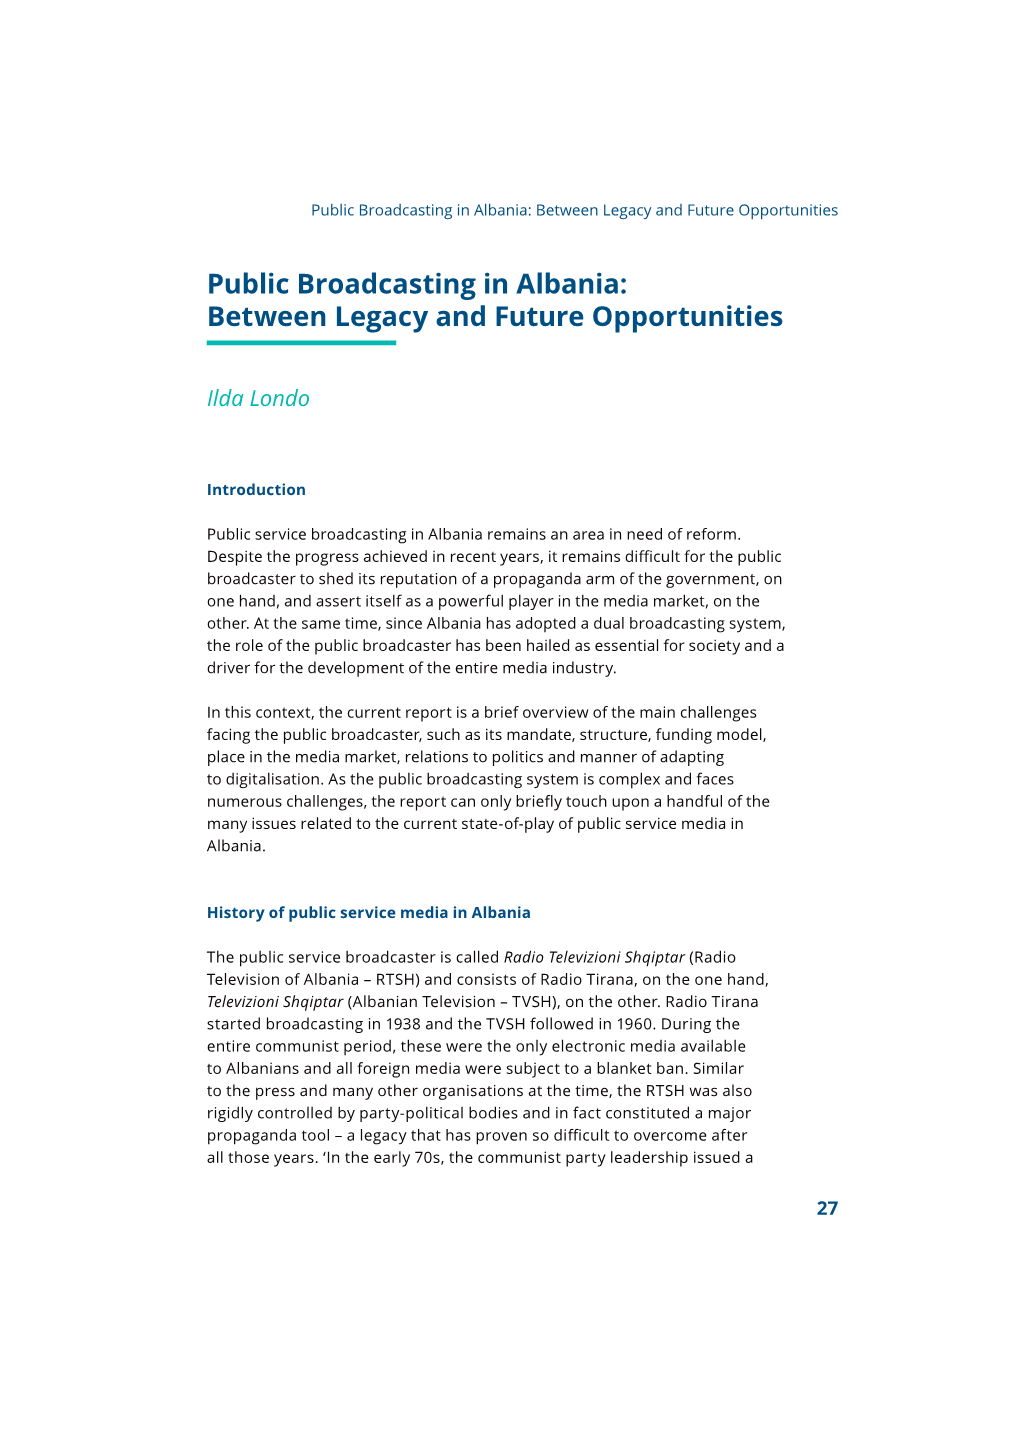 Public Broadcasting in Albania: Between Legacy and Future Opportunities